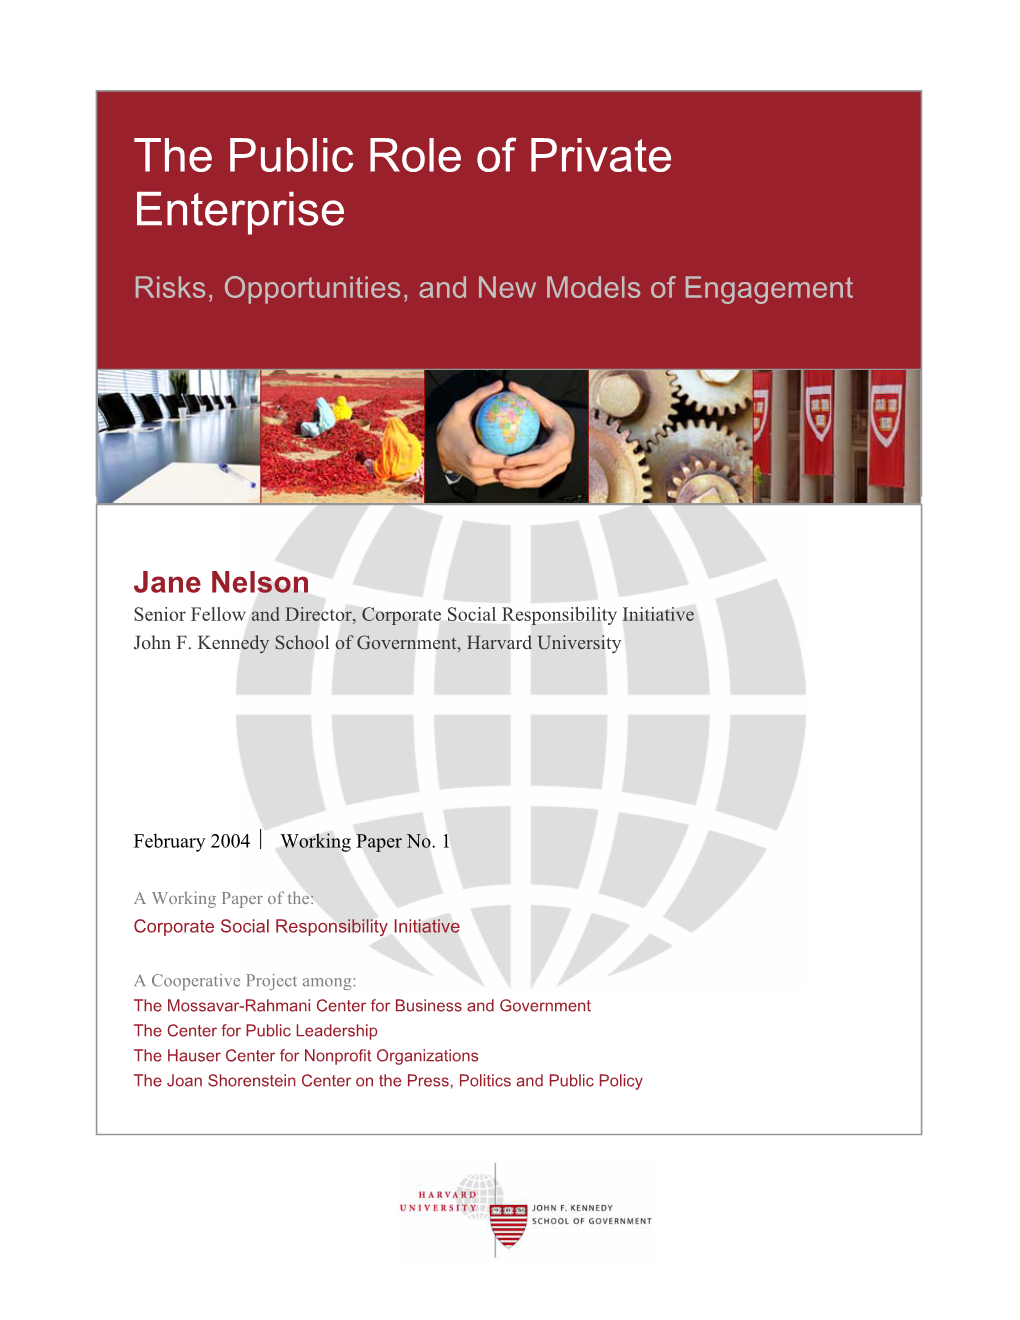 The Public Role of Private Enterprise: Risks, Opportunities and New Models of Engagement